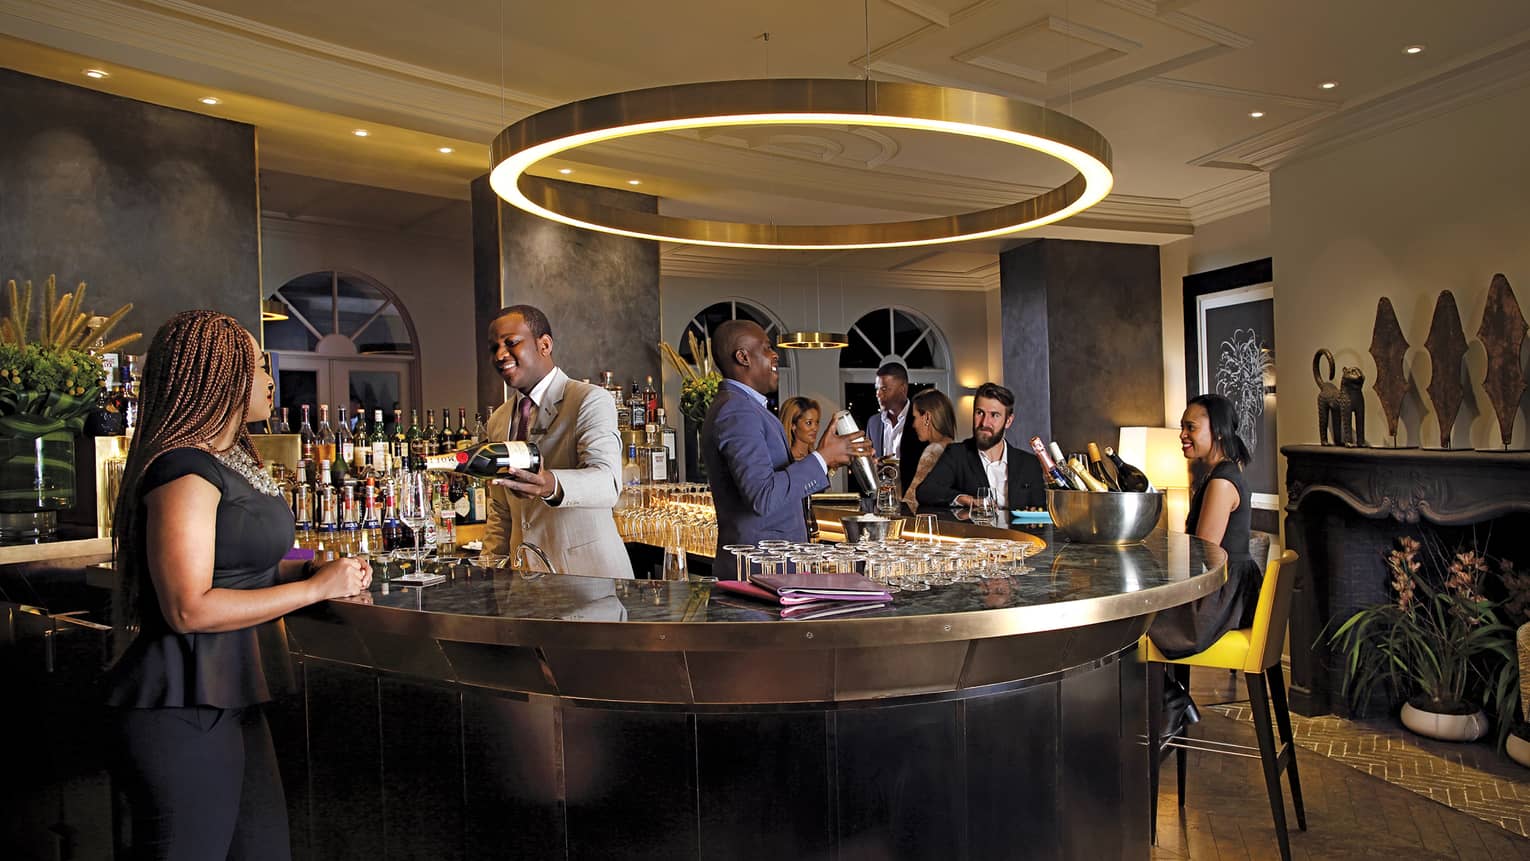 Guests around small circular bar where two bartenders pour drinks